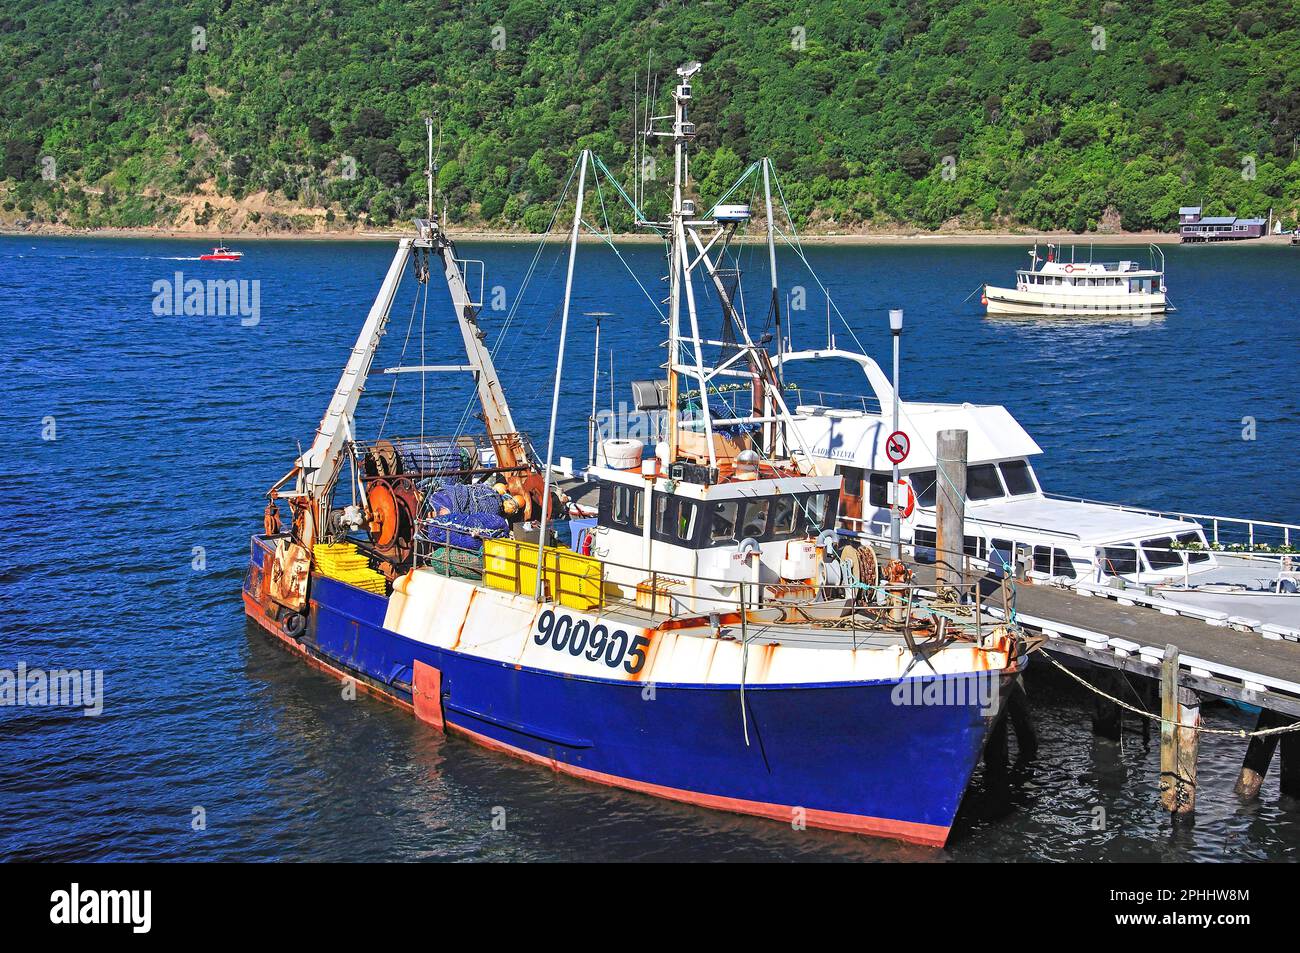 Fishing boat in Harbour, Picton, Queen Charlotte Sound, Marlborough Sounds, Marlborough Region, South Island, New Zealand Stock Photo